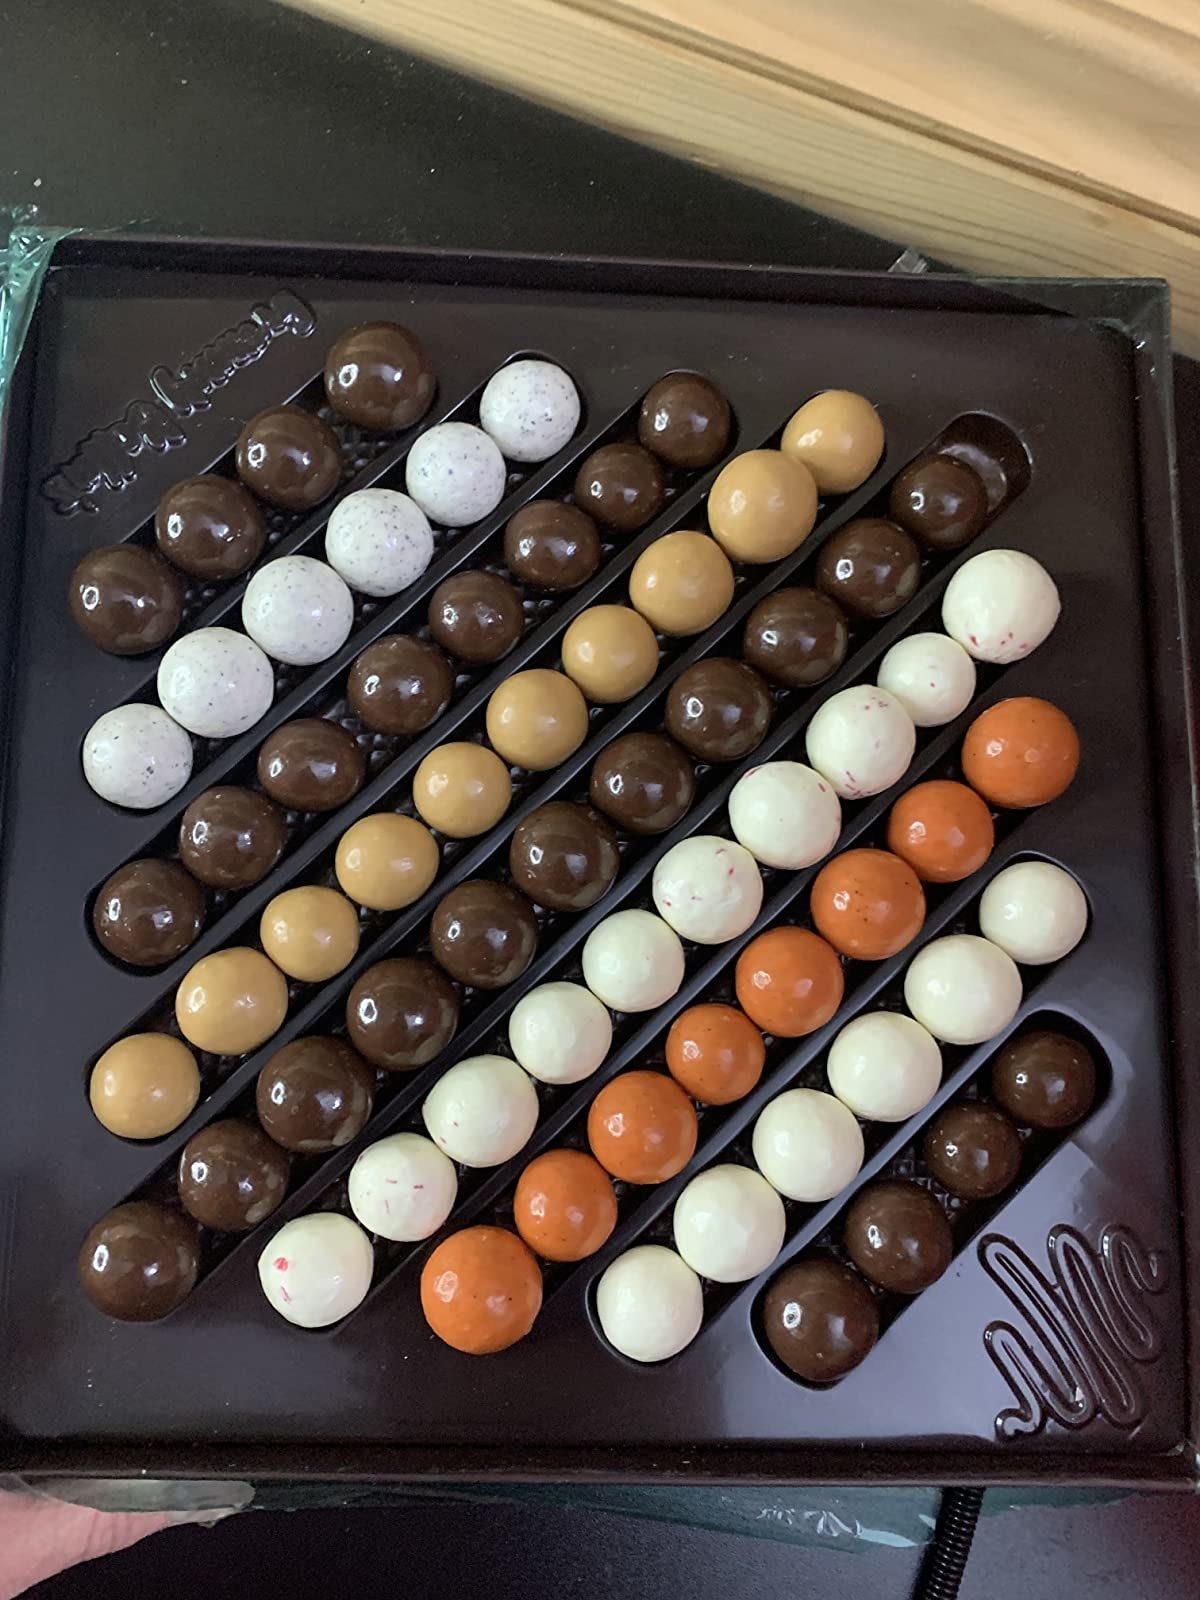 Reviewer photo of a box of malted milk balls in various colors